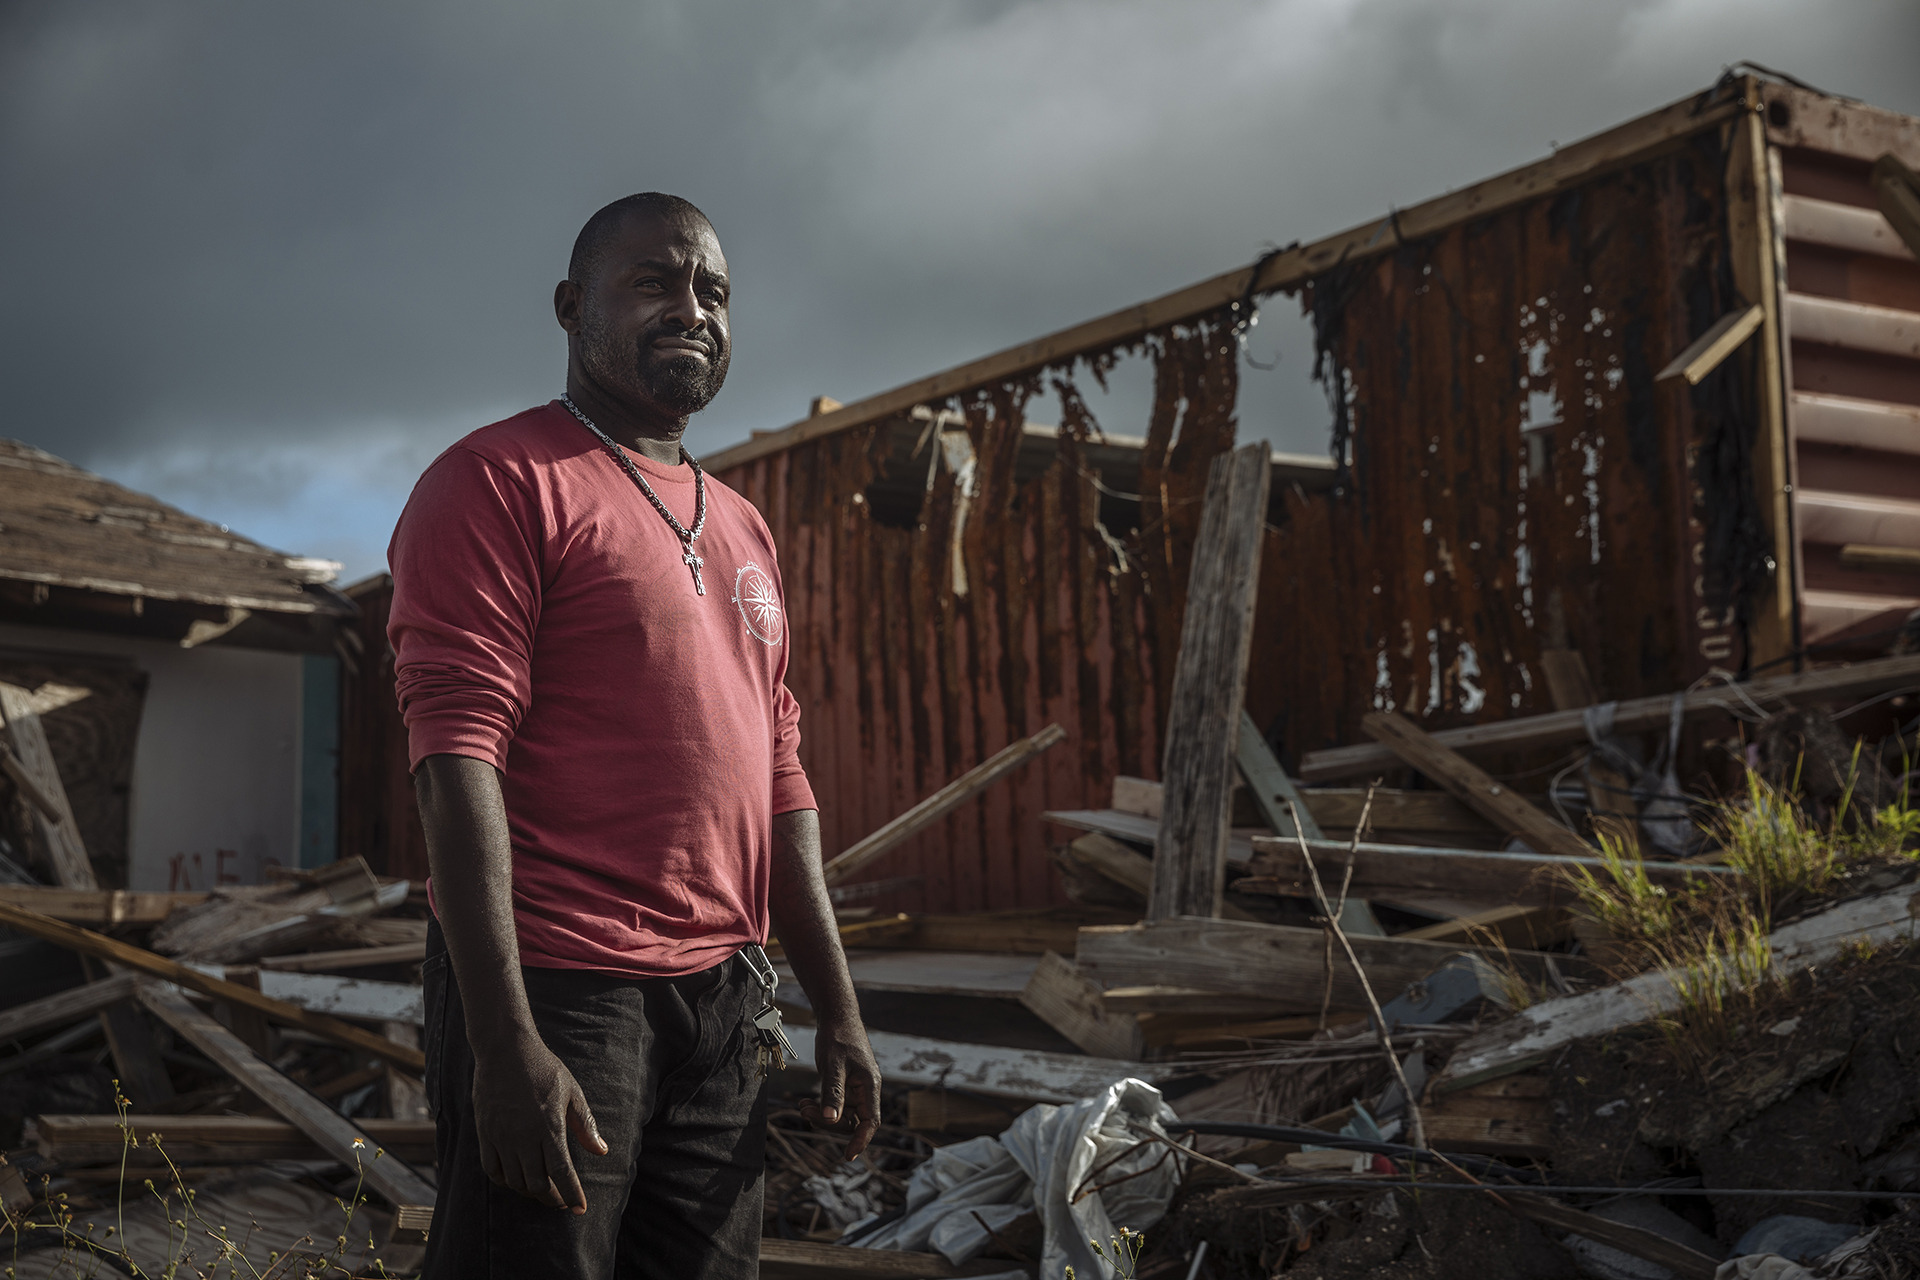  Maurice standing in the middle of the destruction caused by Hurricane Dorian on Abaco